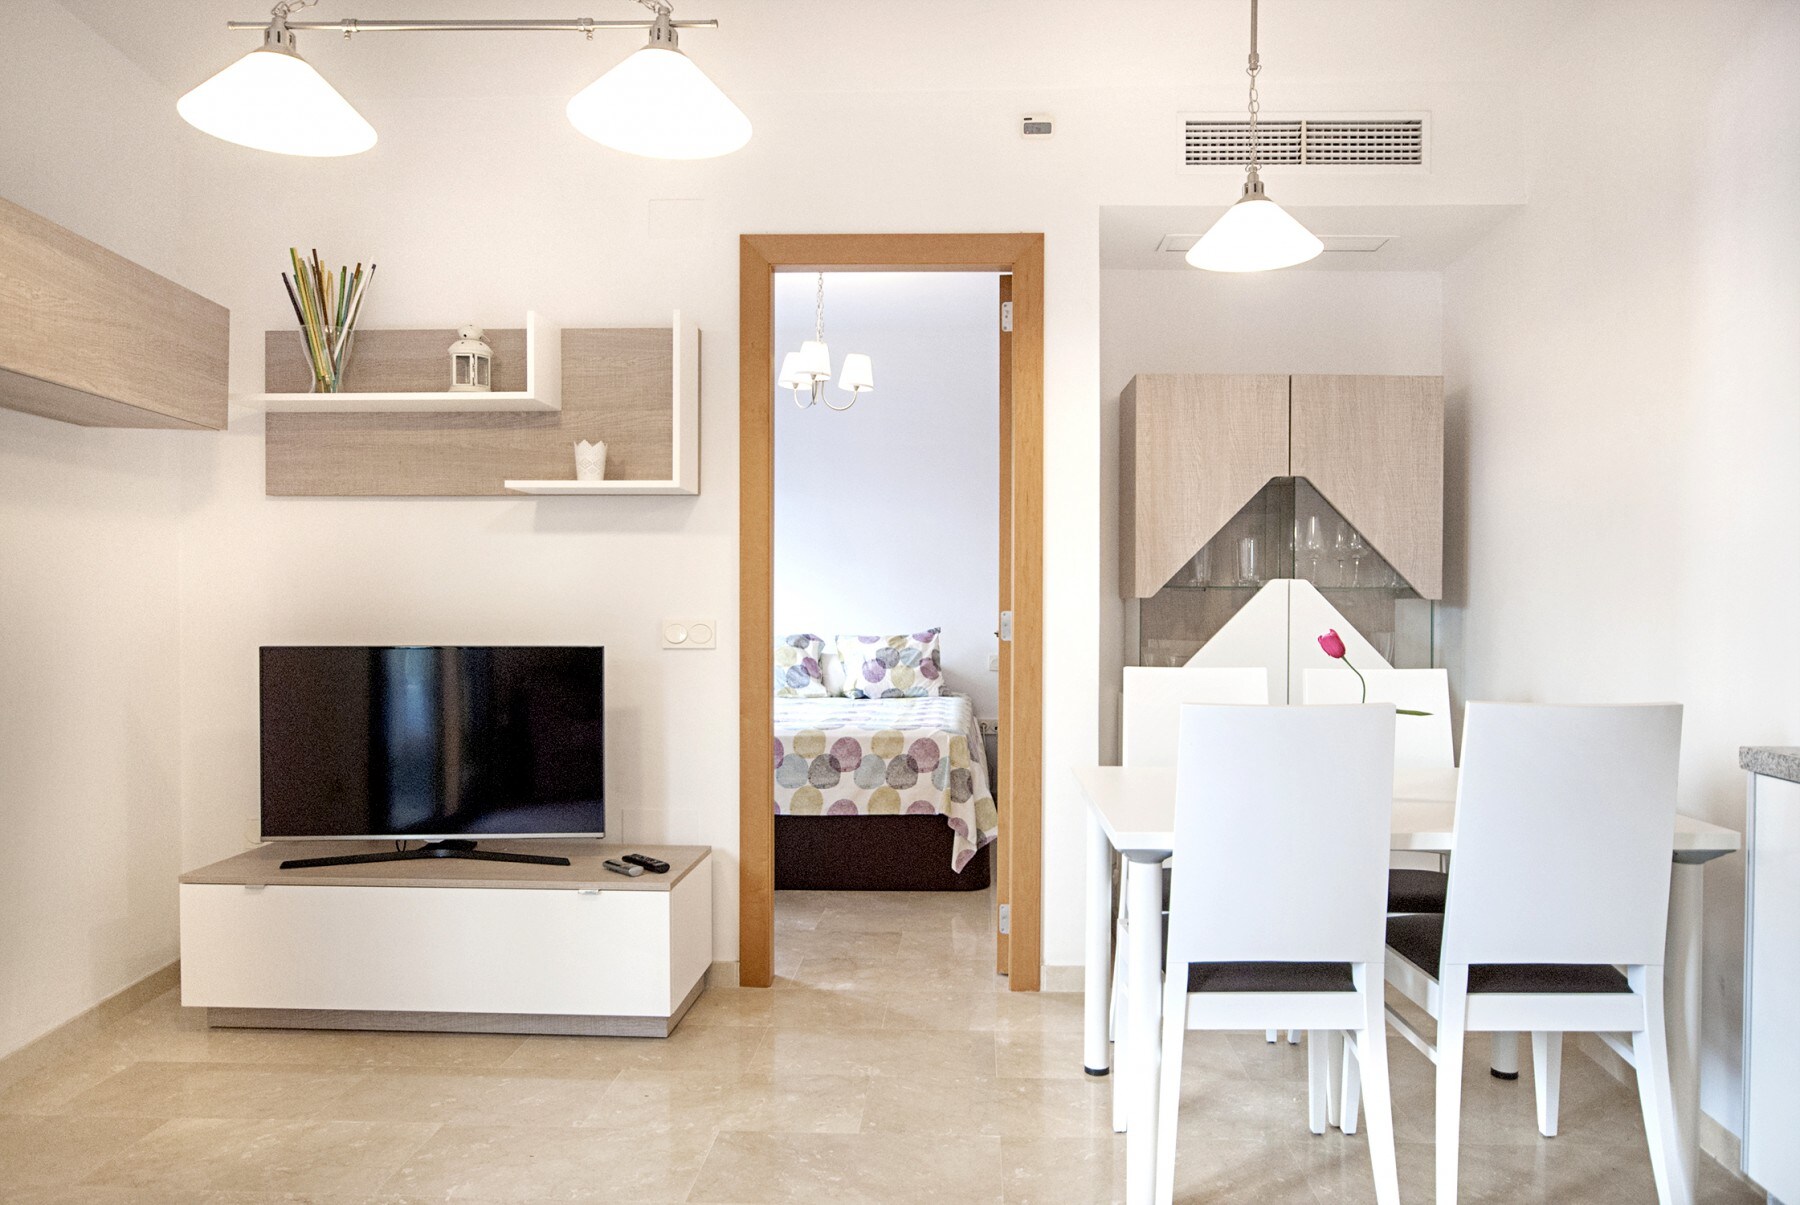 Enjoy the living room of this apartment in Fuengirola